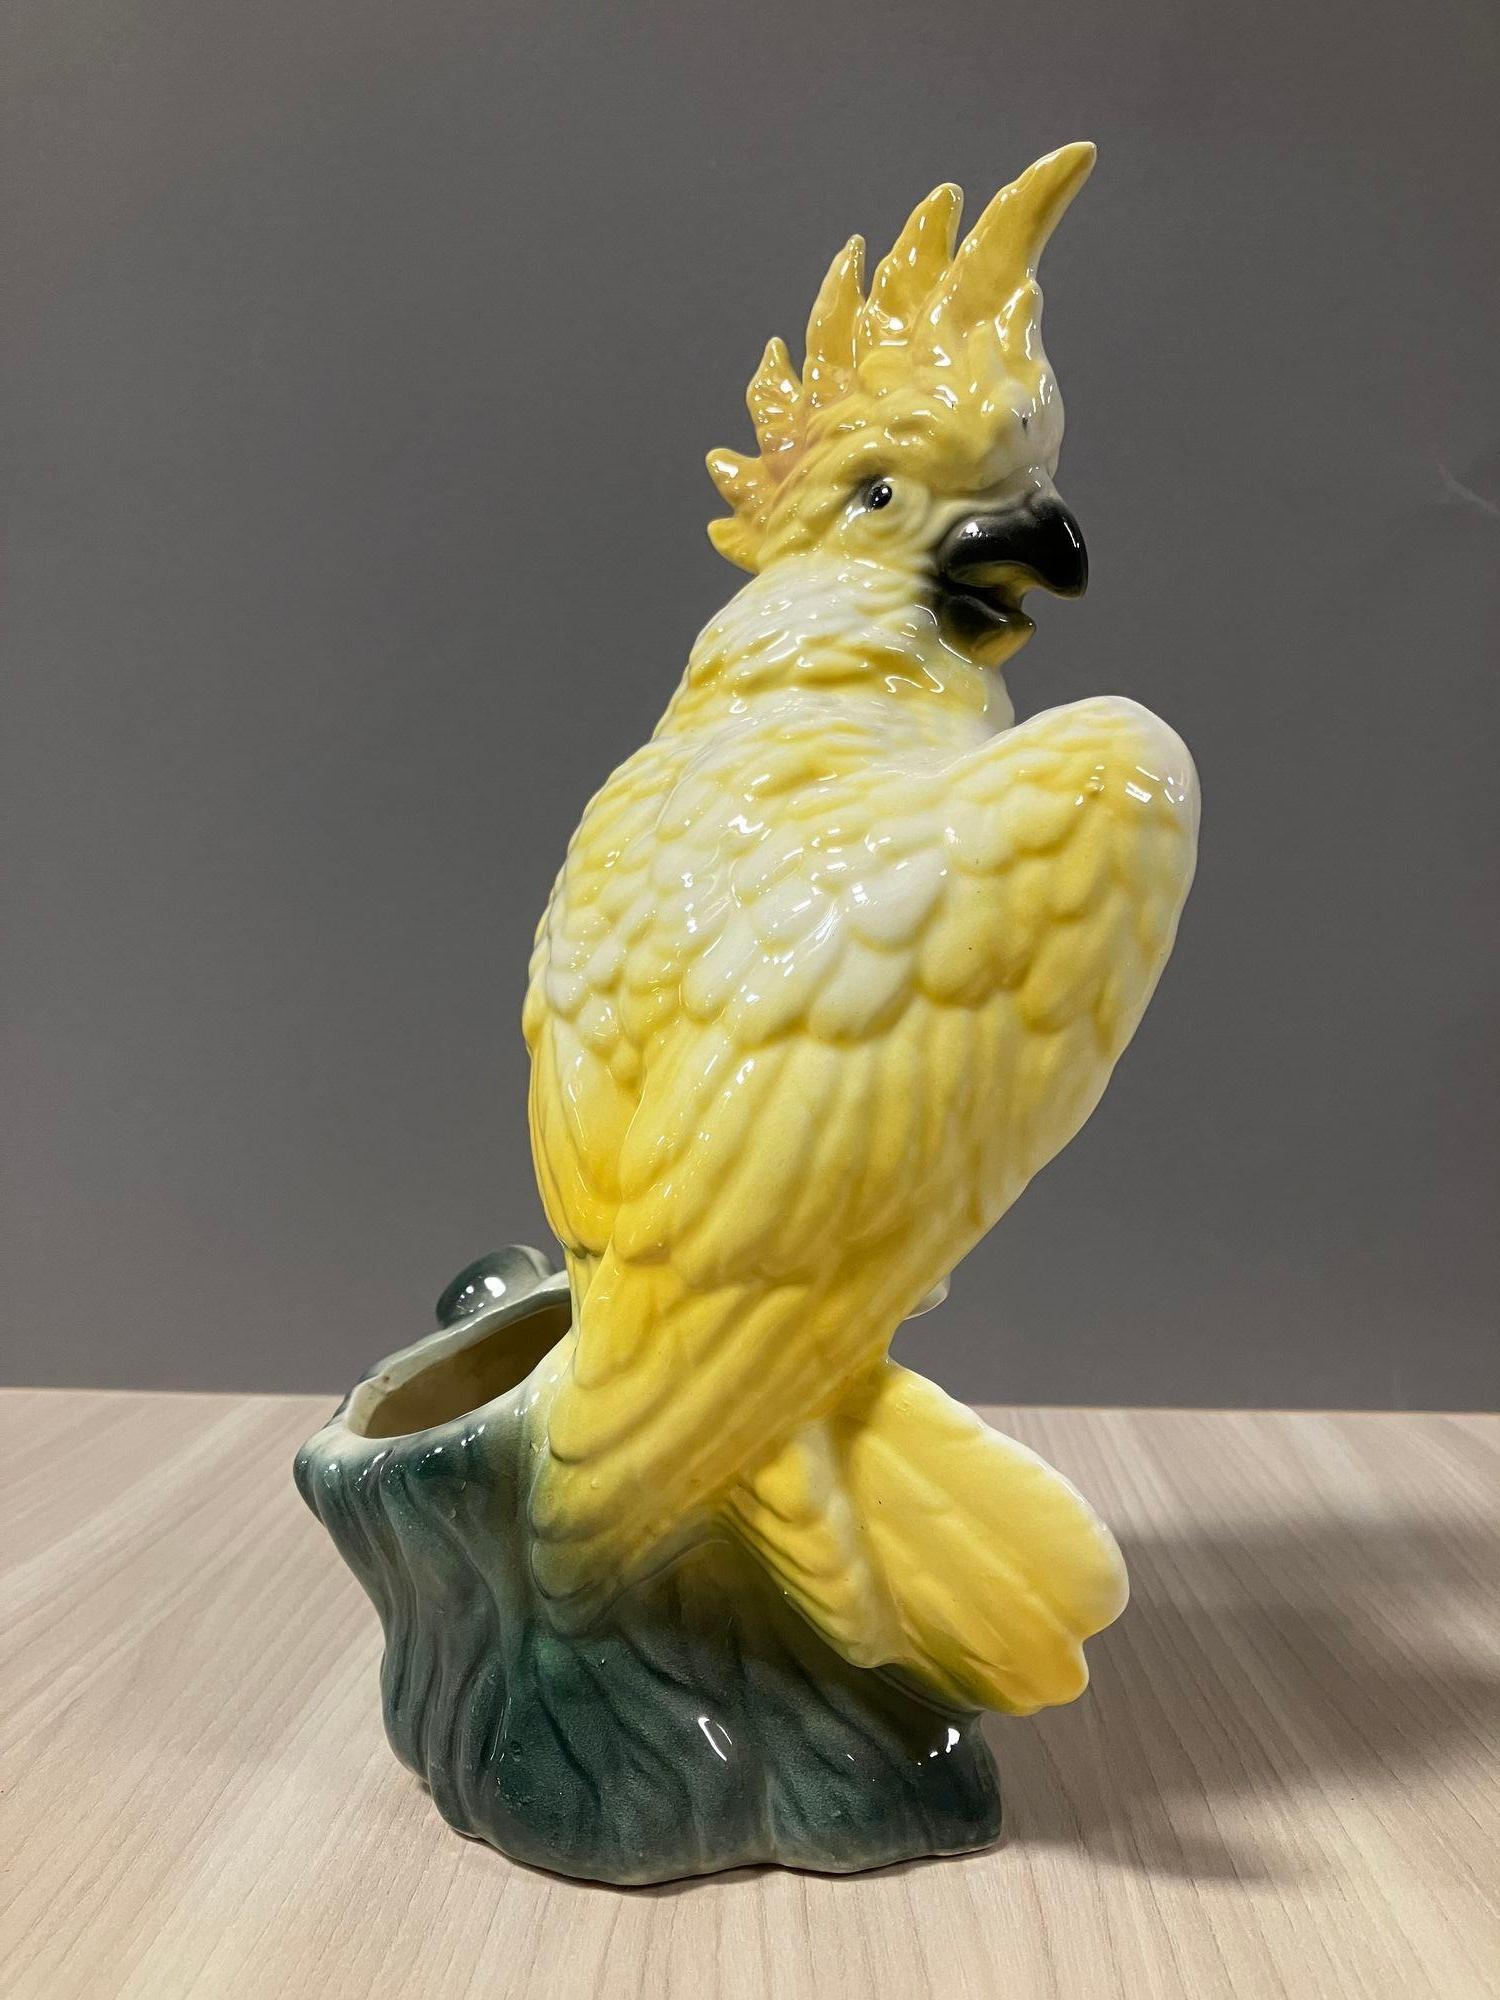 California Pottery Ceramic Tropical Cockatoo Bud Vase Statue In Excellent Condition For Sale In Van Nuys, CA